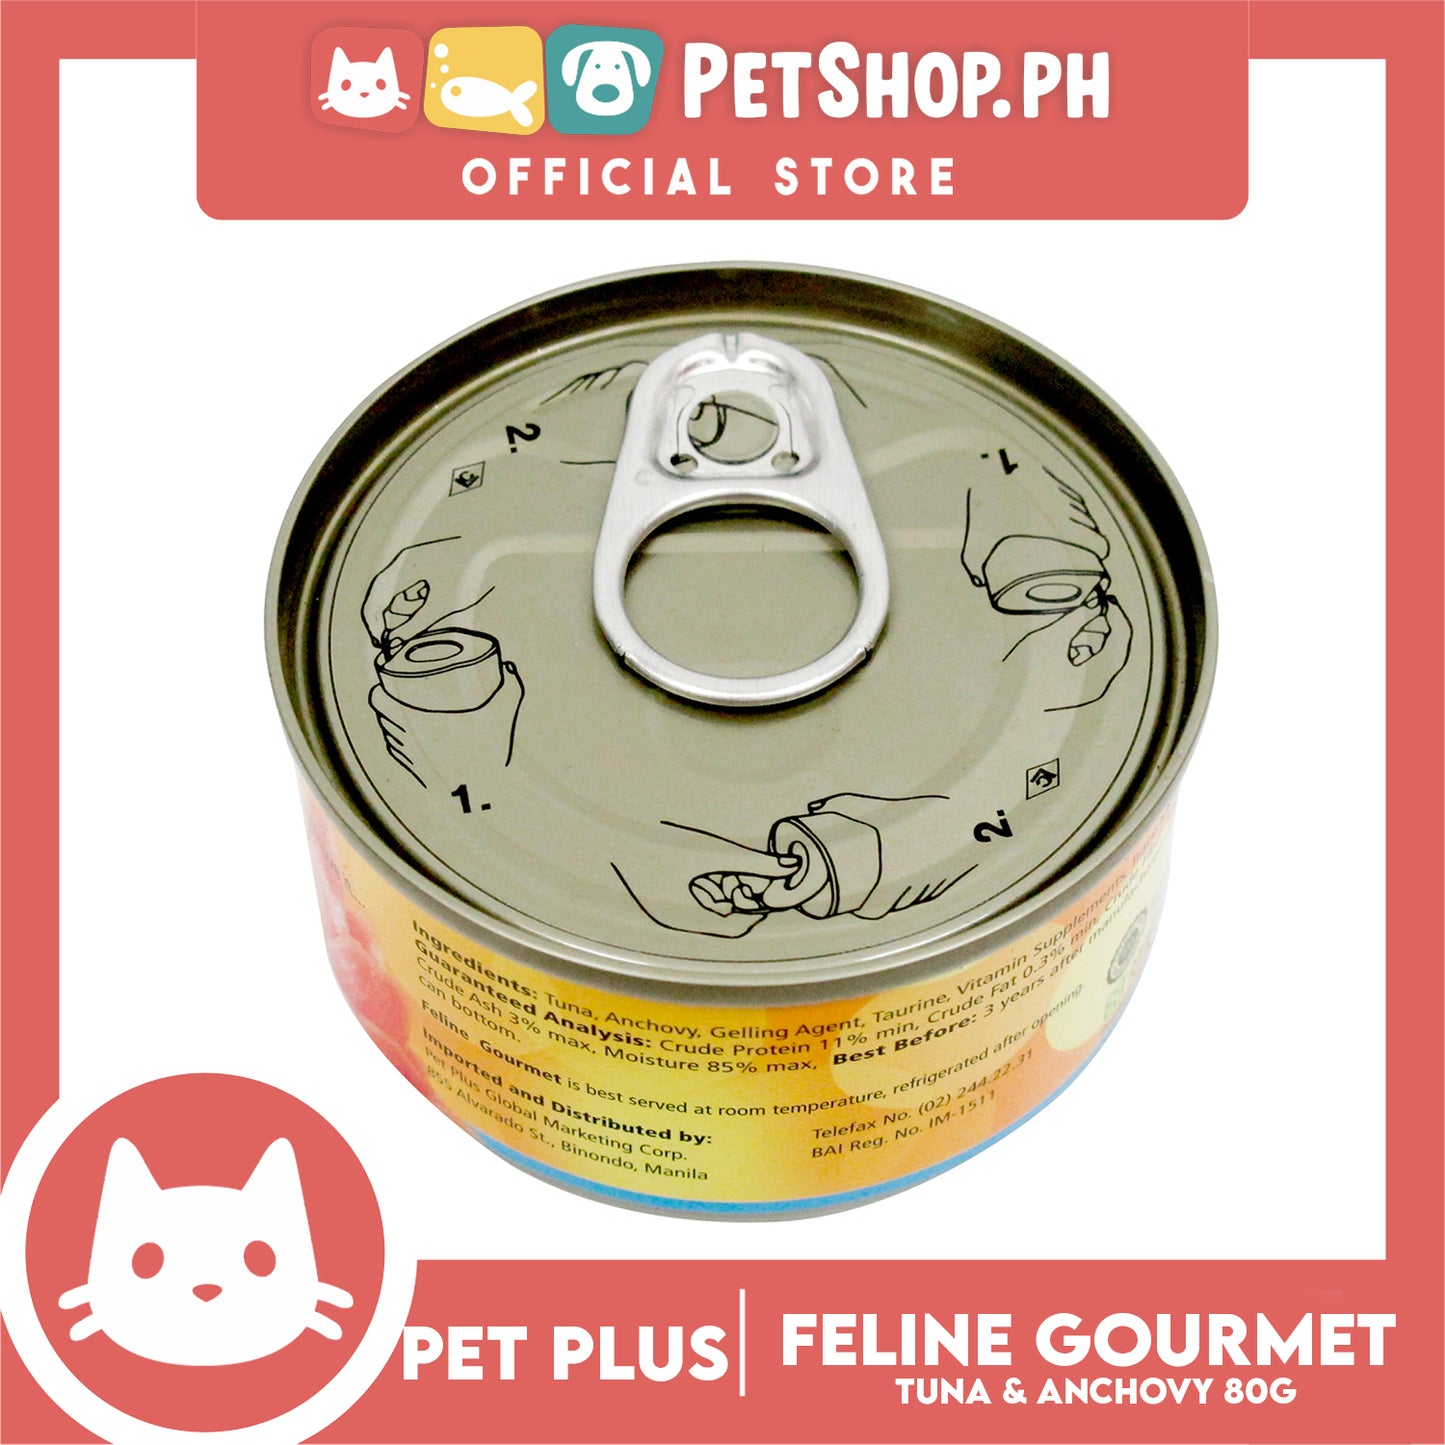 Pet Plus Feline Gourmet 80g (Tuna And Anchovy Flavor) Canned Cat Food